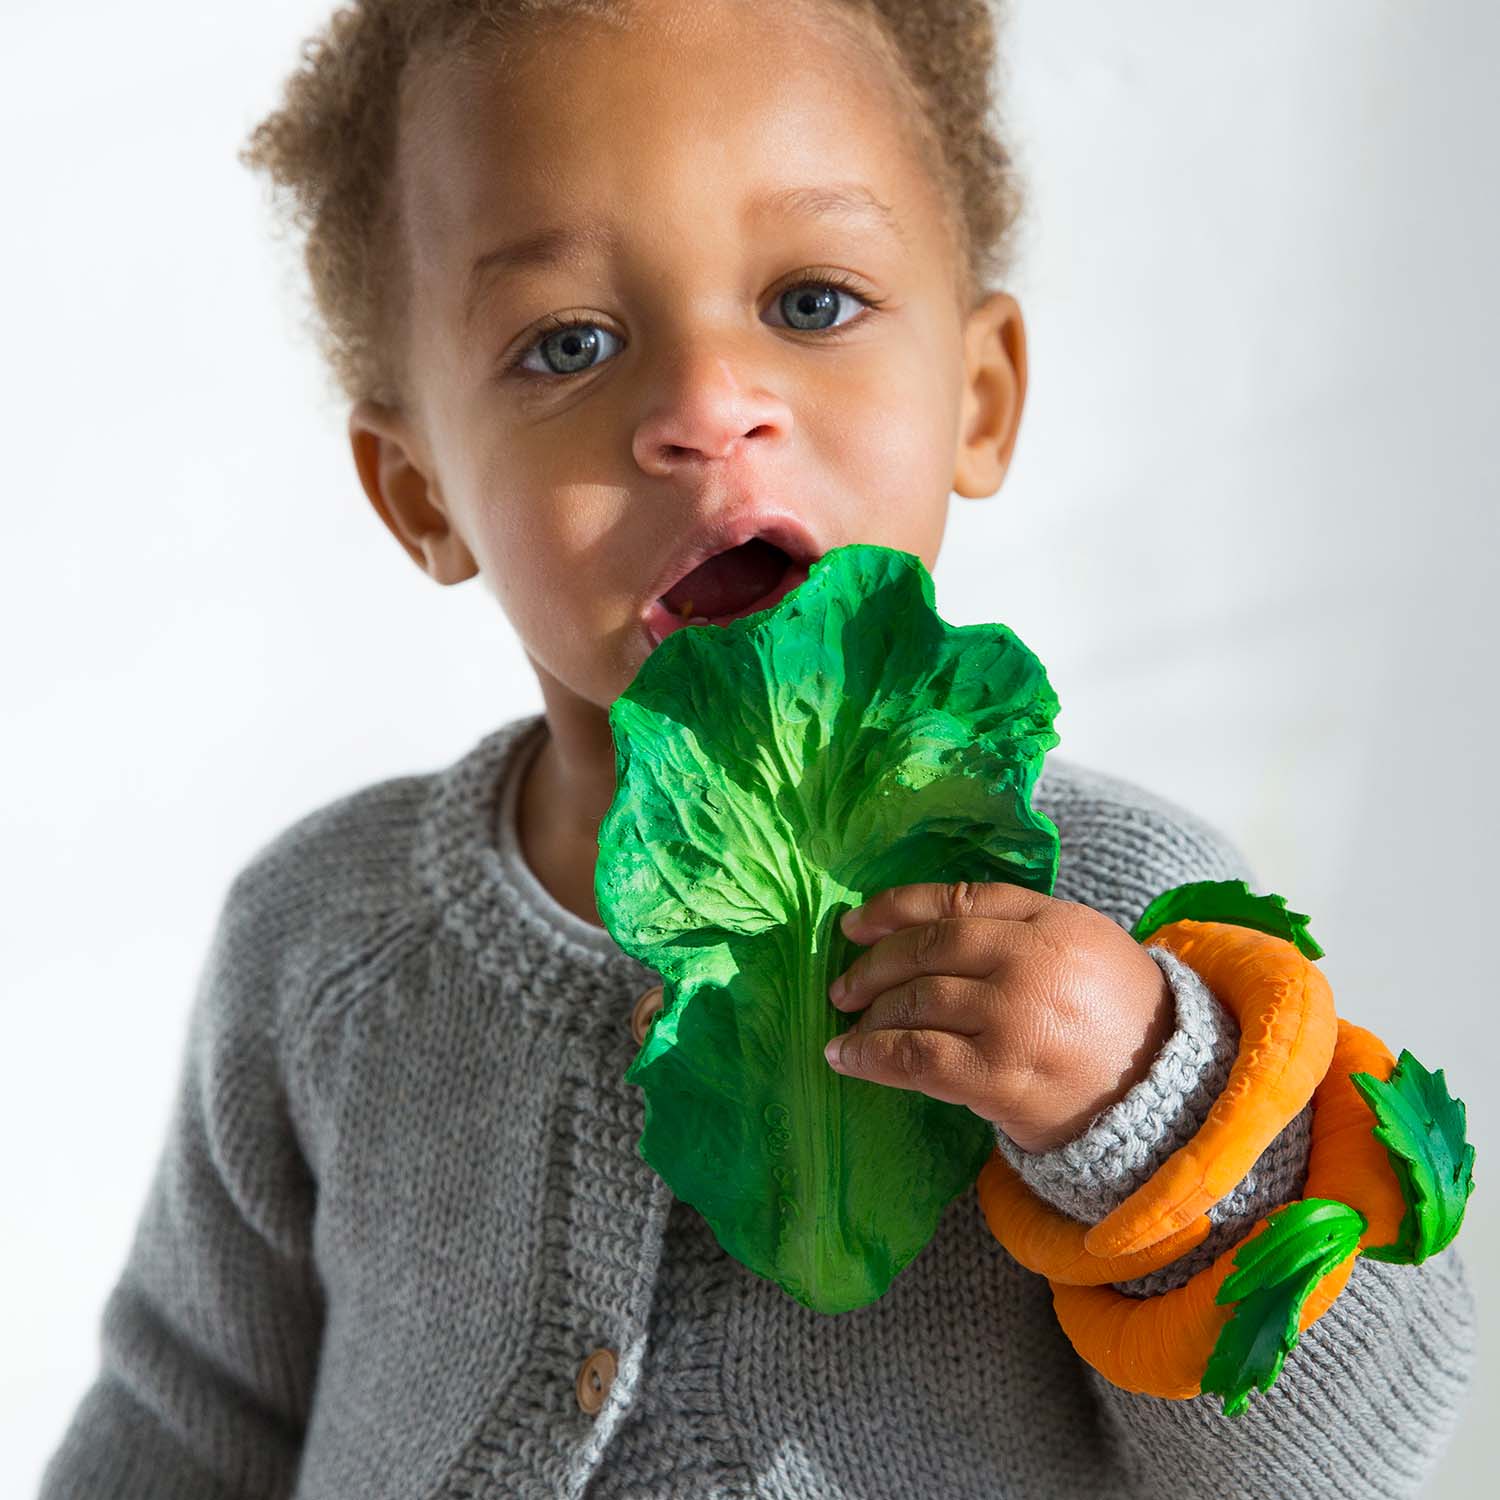 Photo of baby biting into kale baby toy.